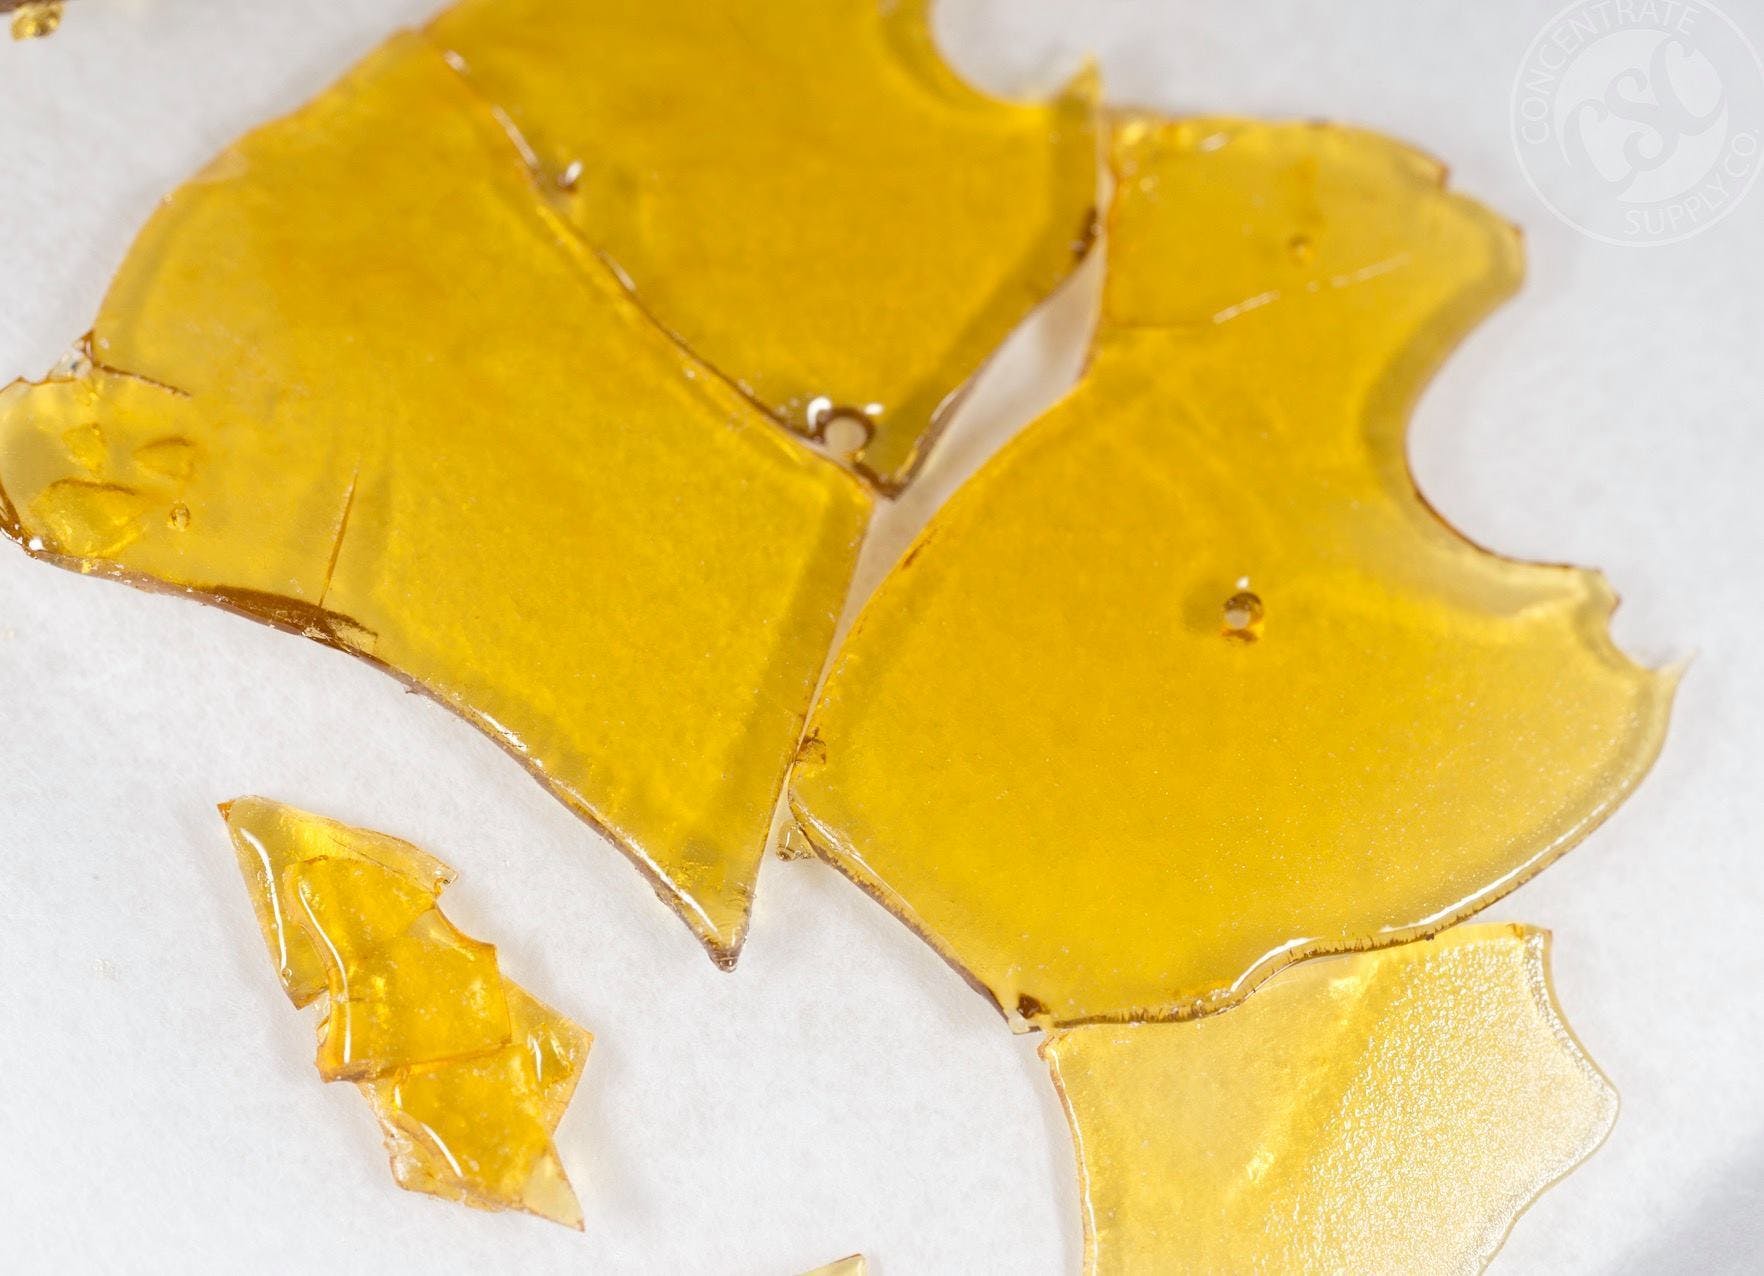 concentrate-csc-grape-stomper-shatter